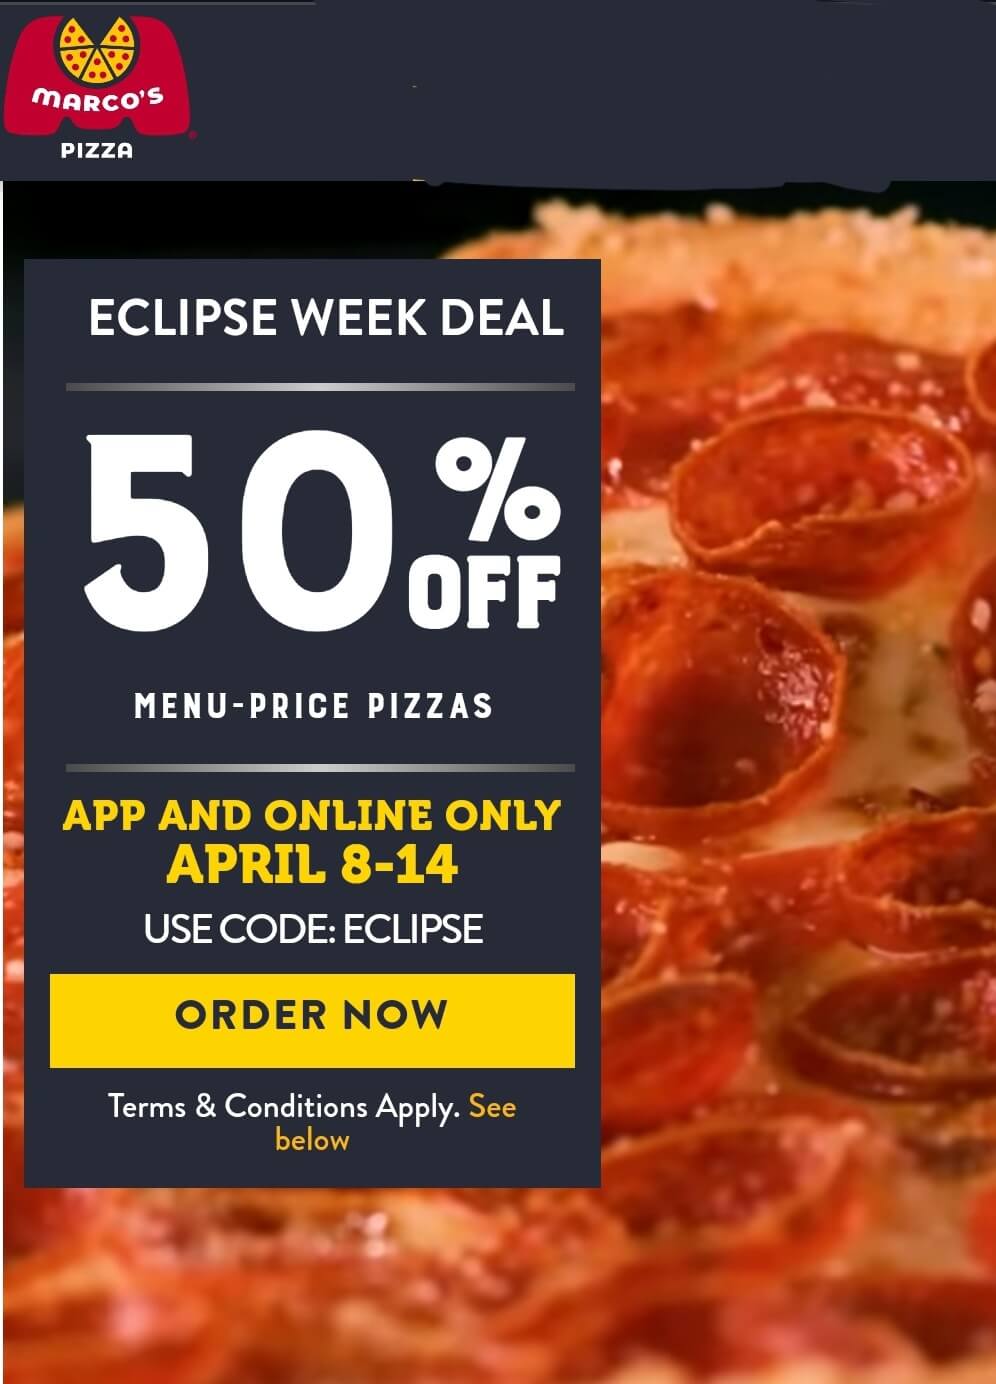 Marcos restaurants Coupon  50% off pizza online at Marcos via promo code ECLIPSE #marcos 